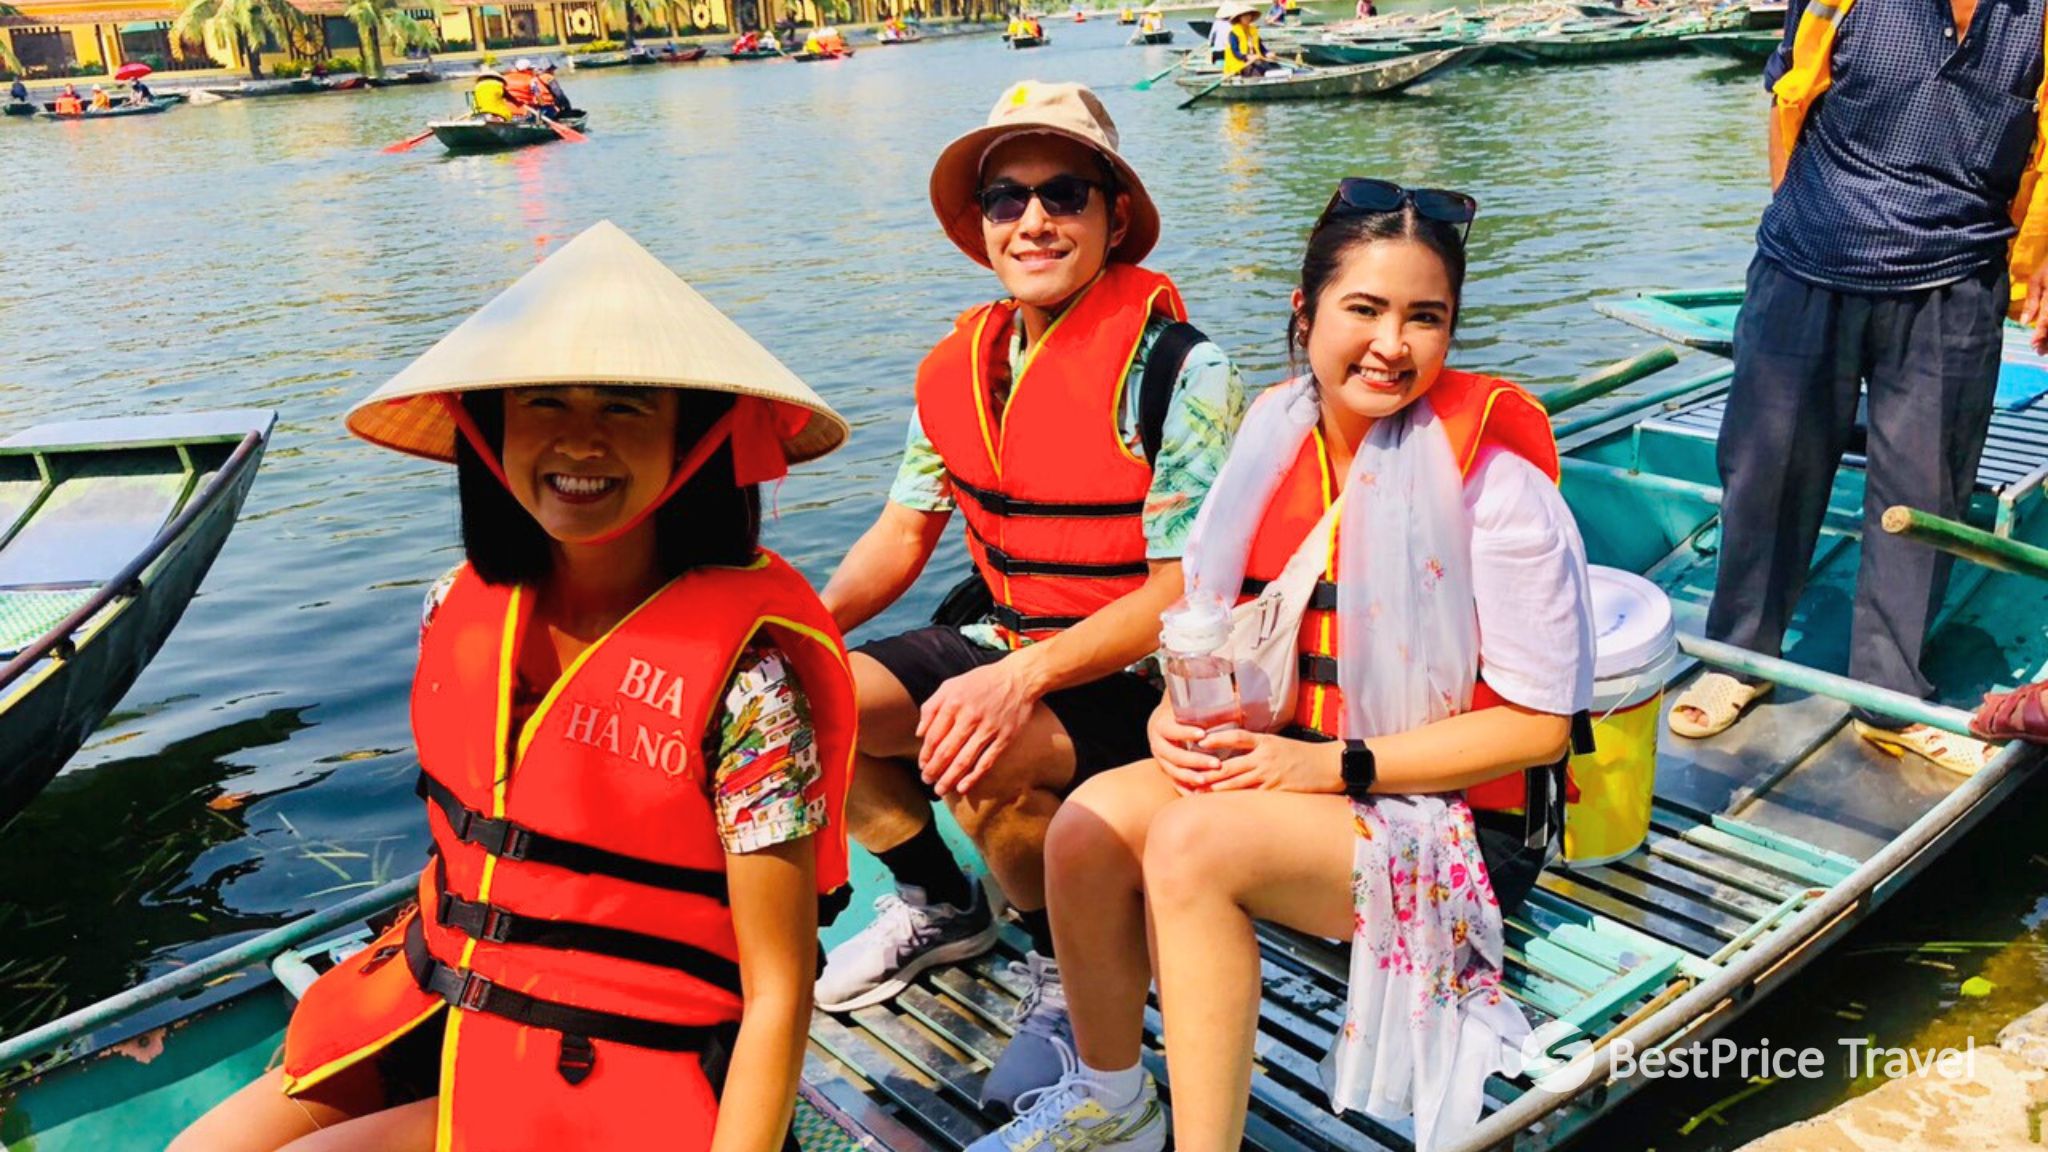 Day 3 Take A Boat Trip With Your Beloved To Explore Ninh Binh